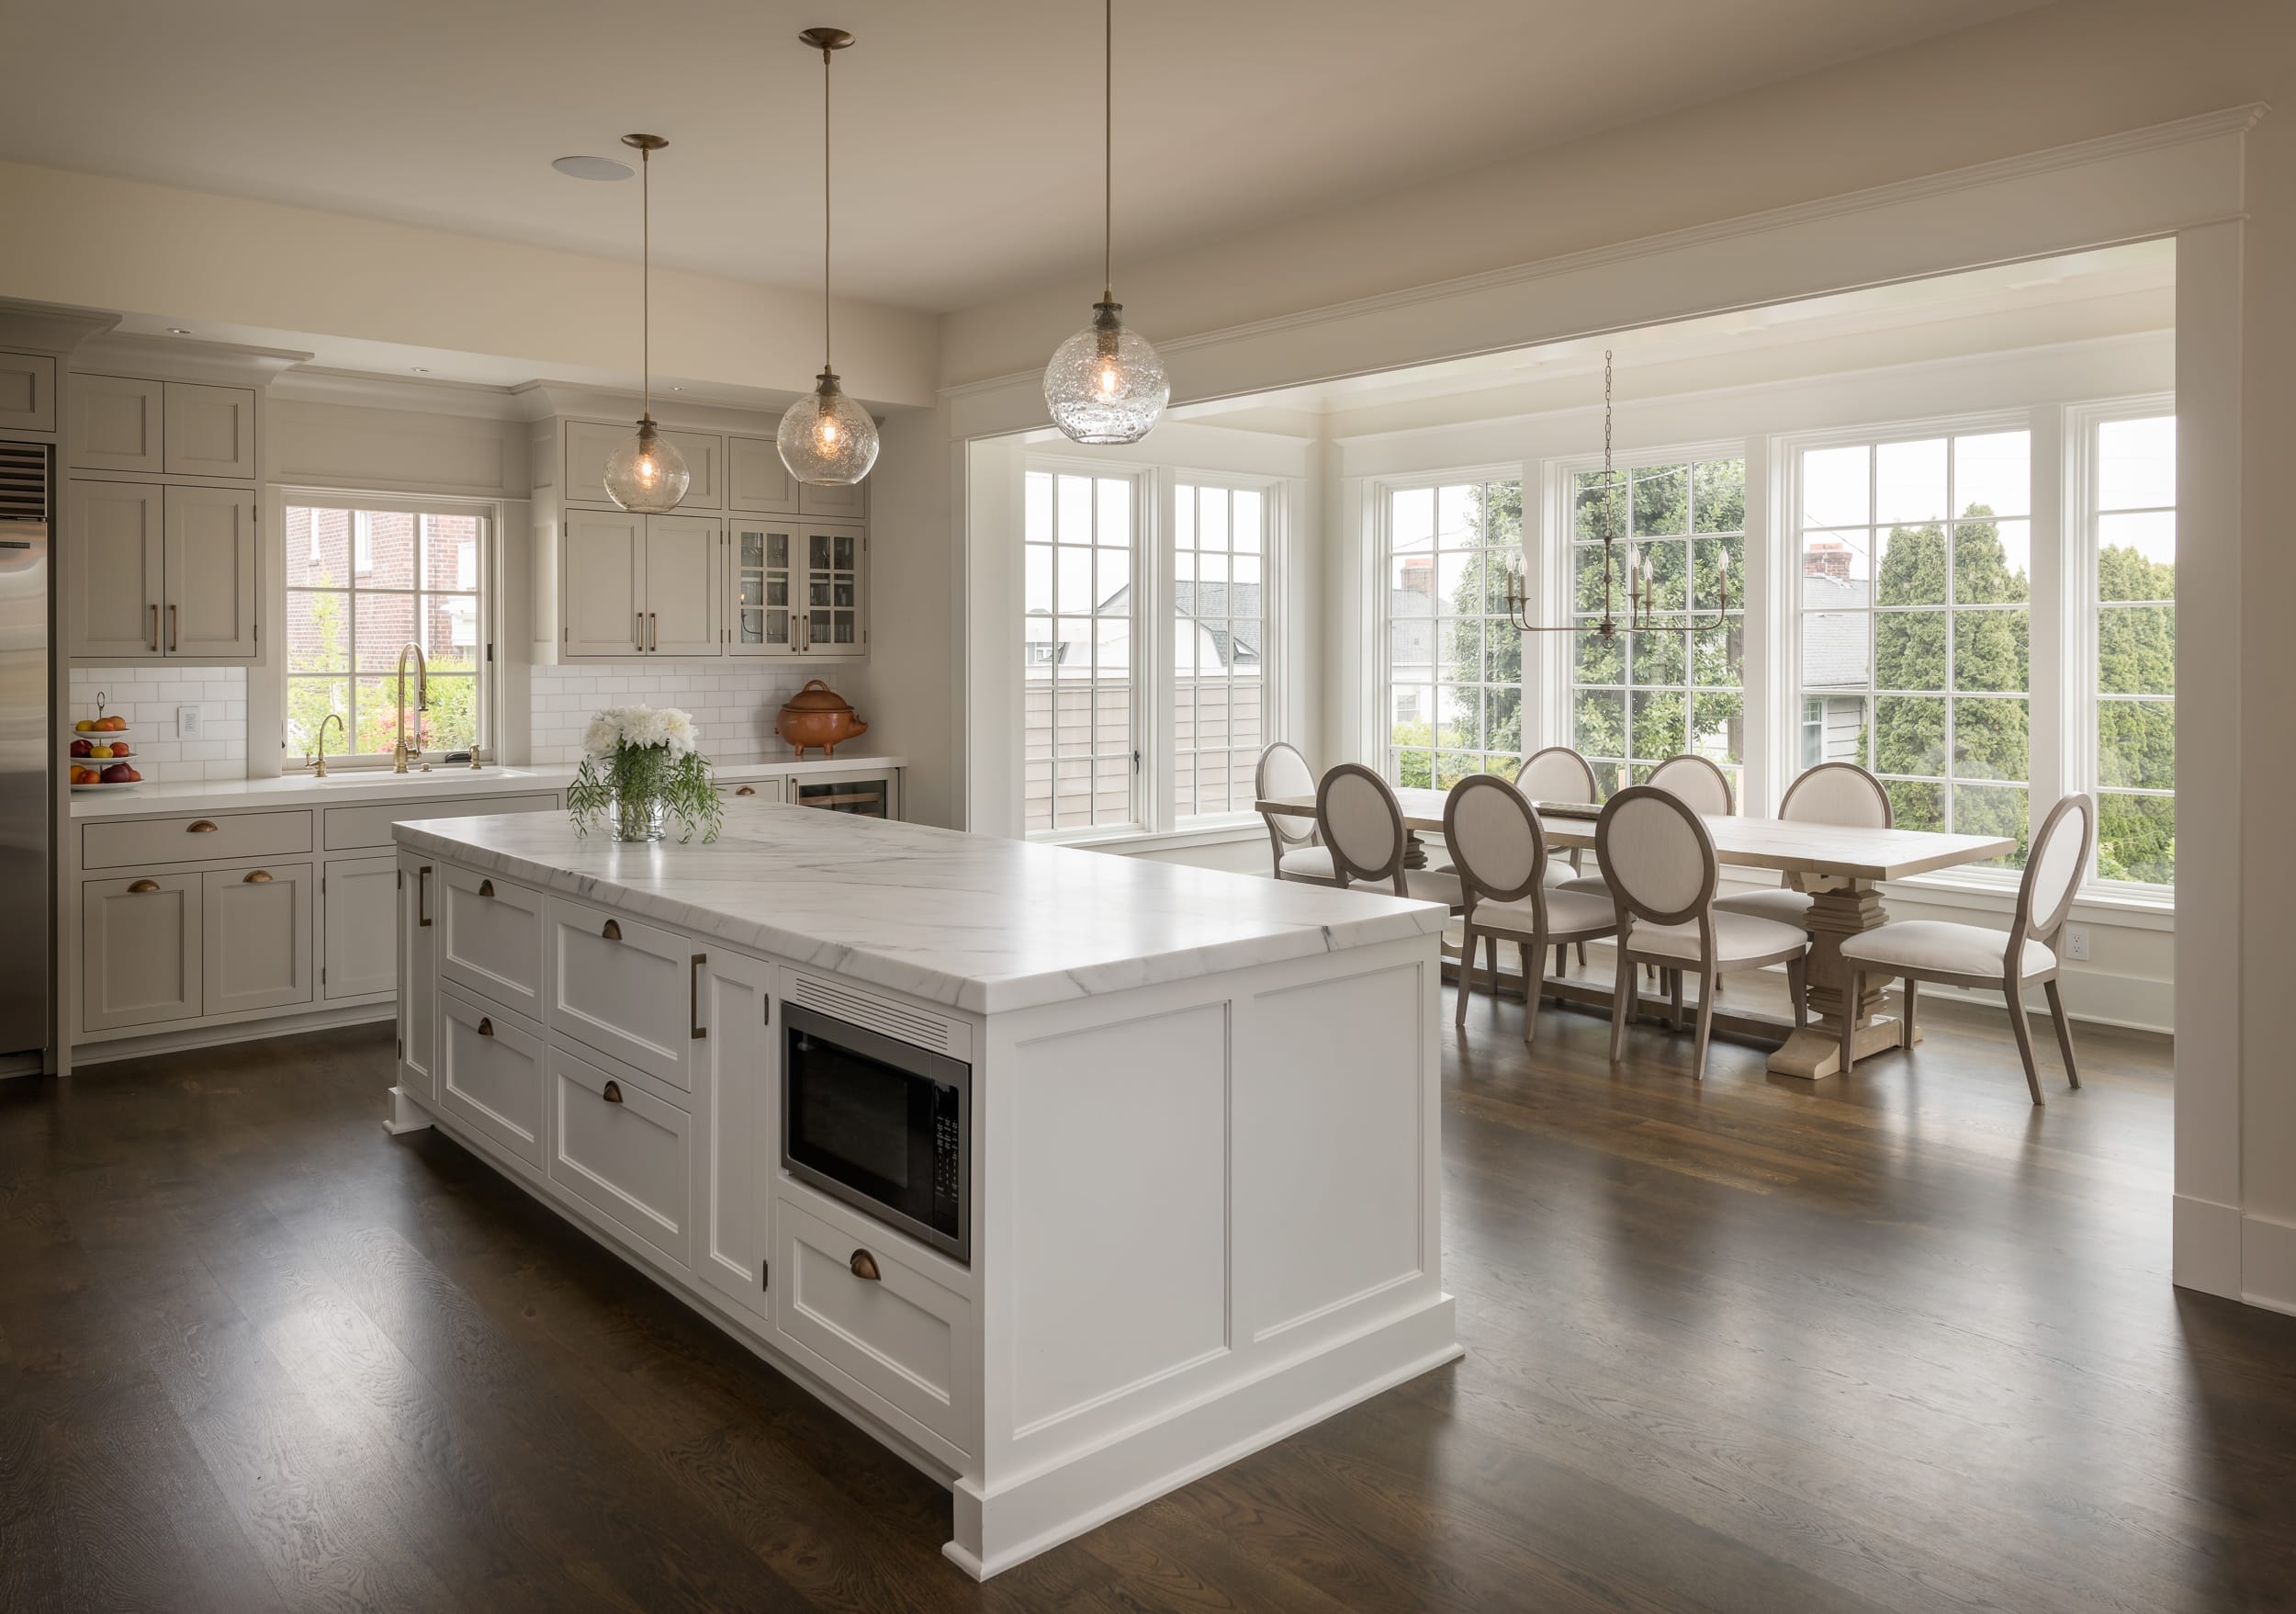 A kitchen with hardwood floors and a large island, built by a skilled carpenter.